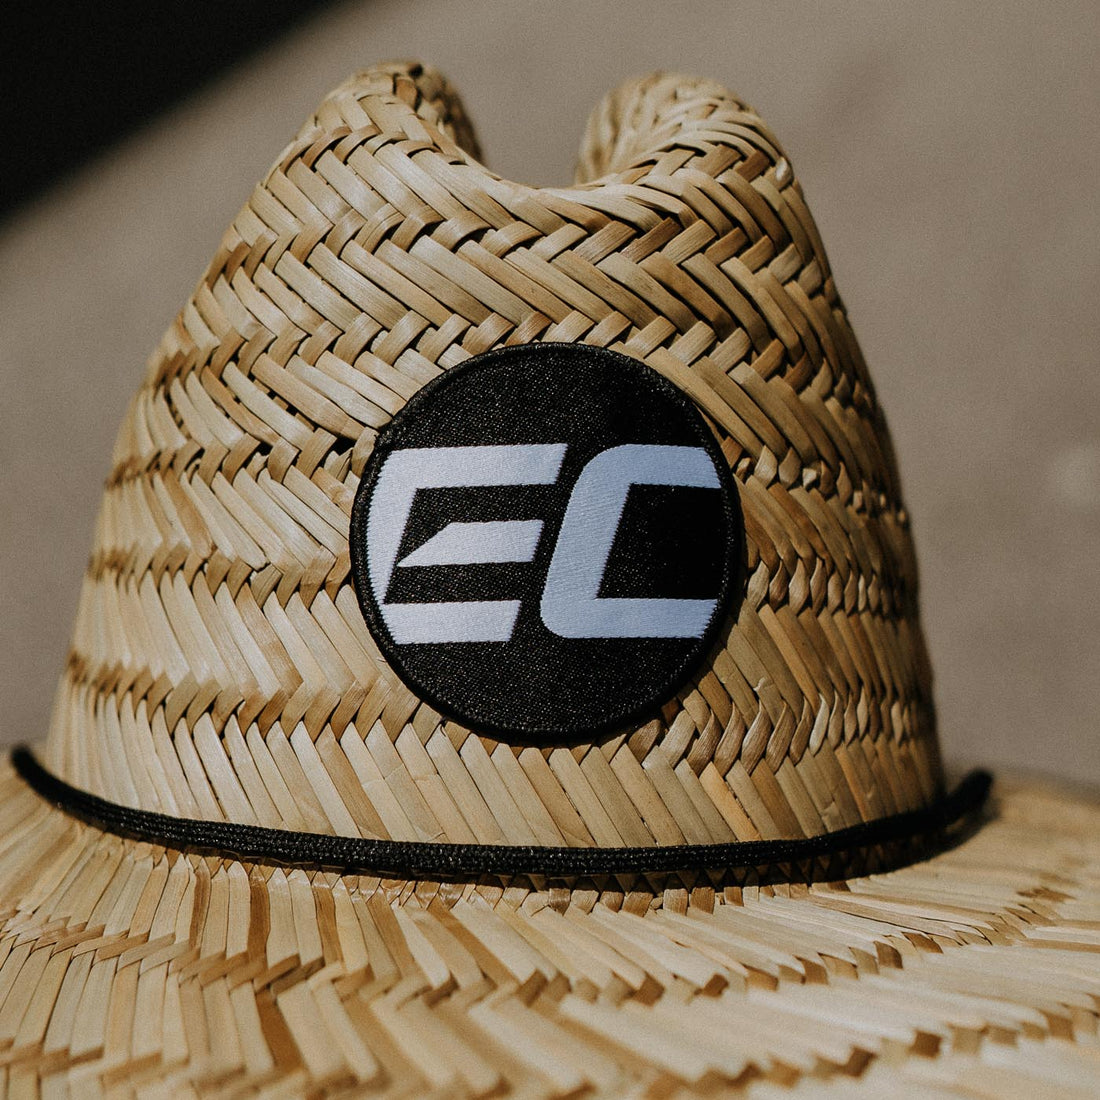 Empire Cycles Summer Straw Hat